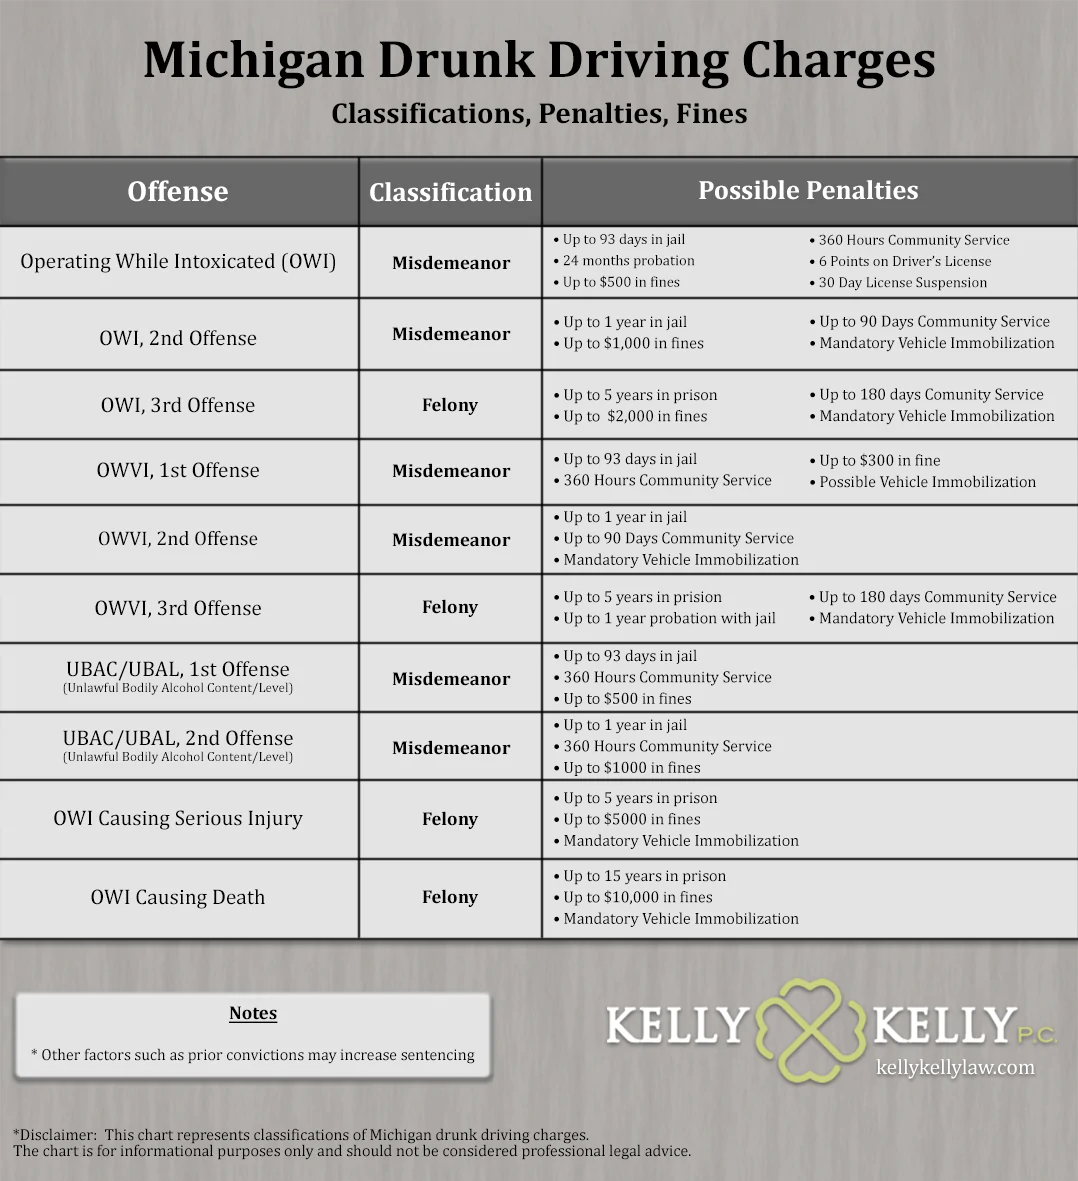 A chart showing the various degrees of drunk driving classifications, charges, and penalties in Michigan. This ranges from OWI punishable by up to 93 days in jail all the way up to OWI causing death punishable by up to 15 years in prison